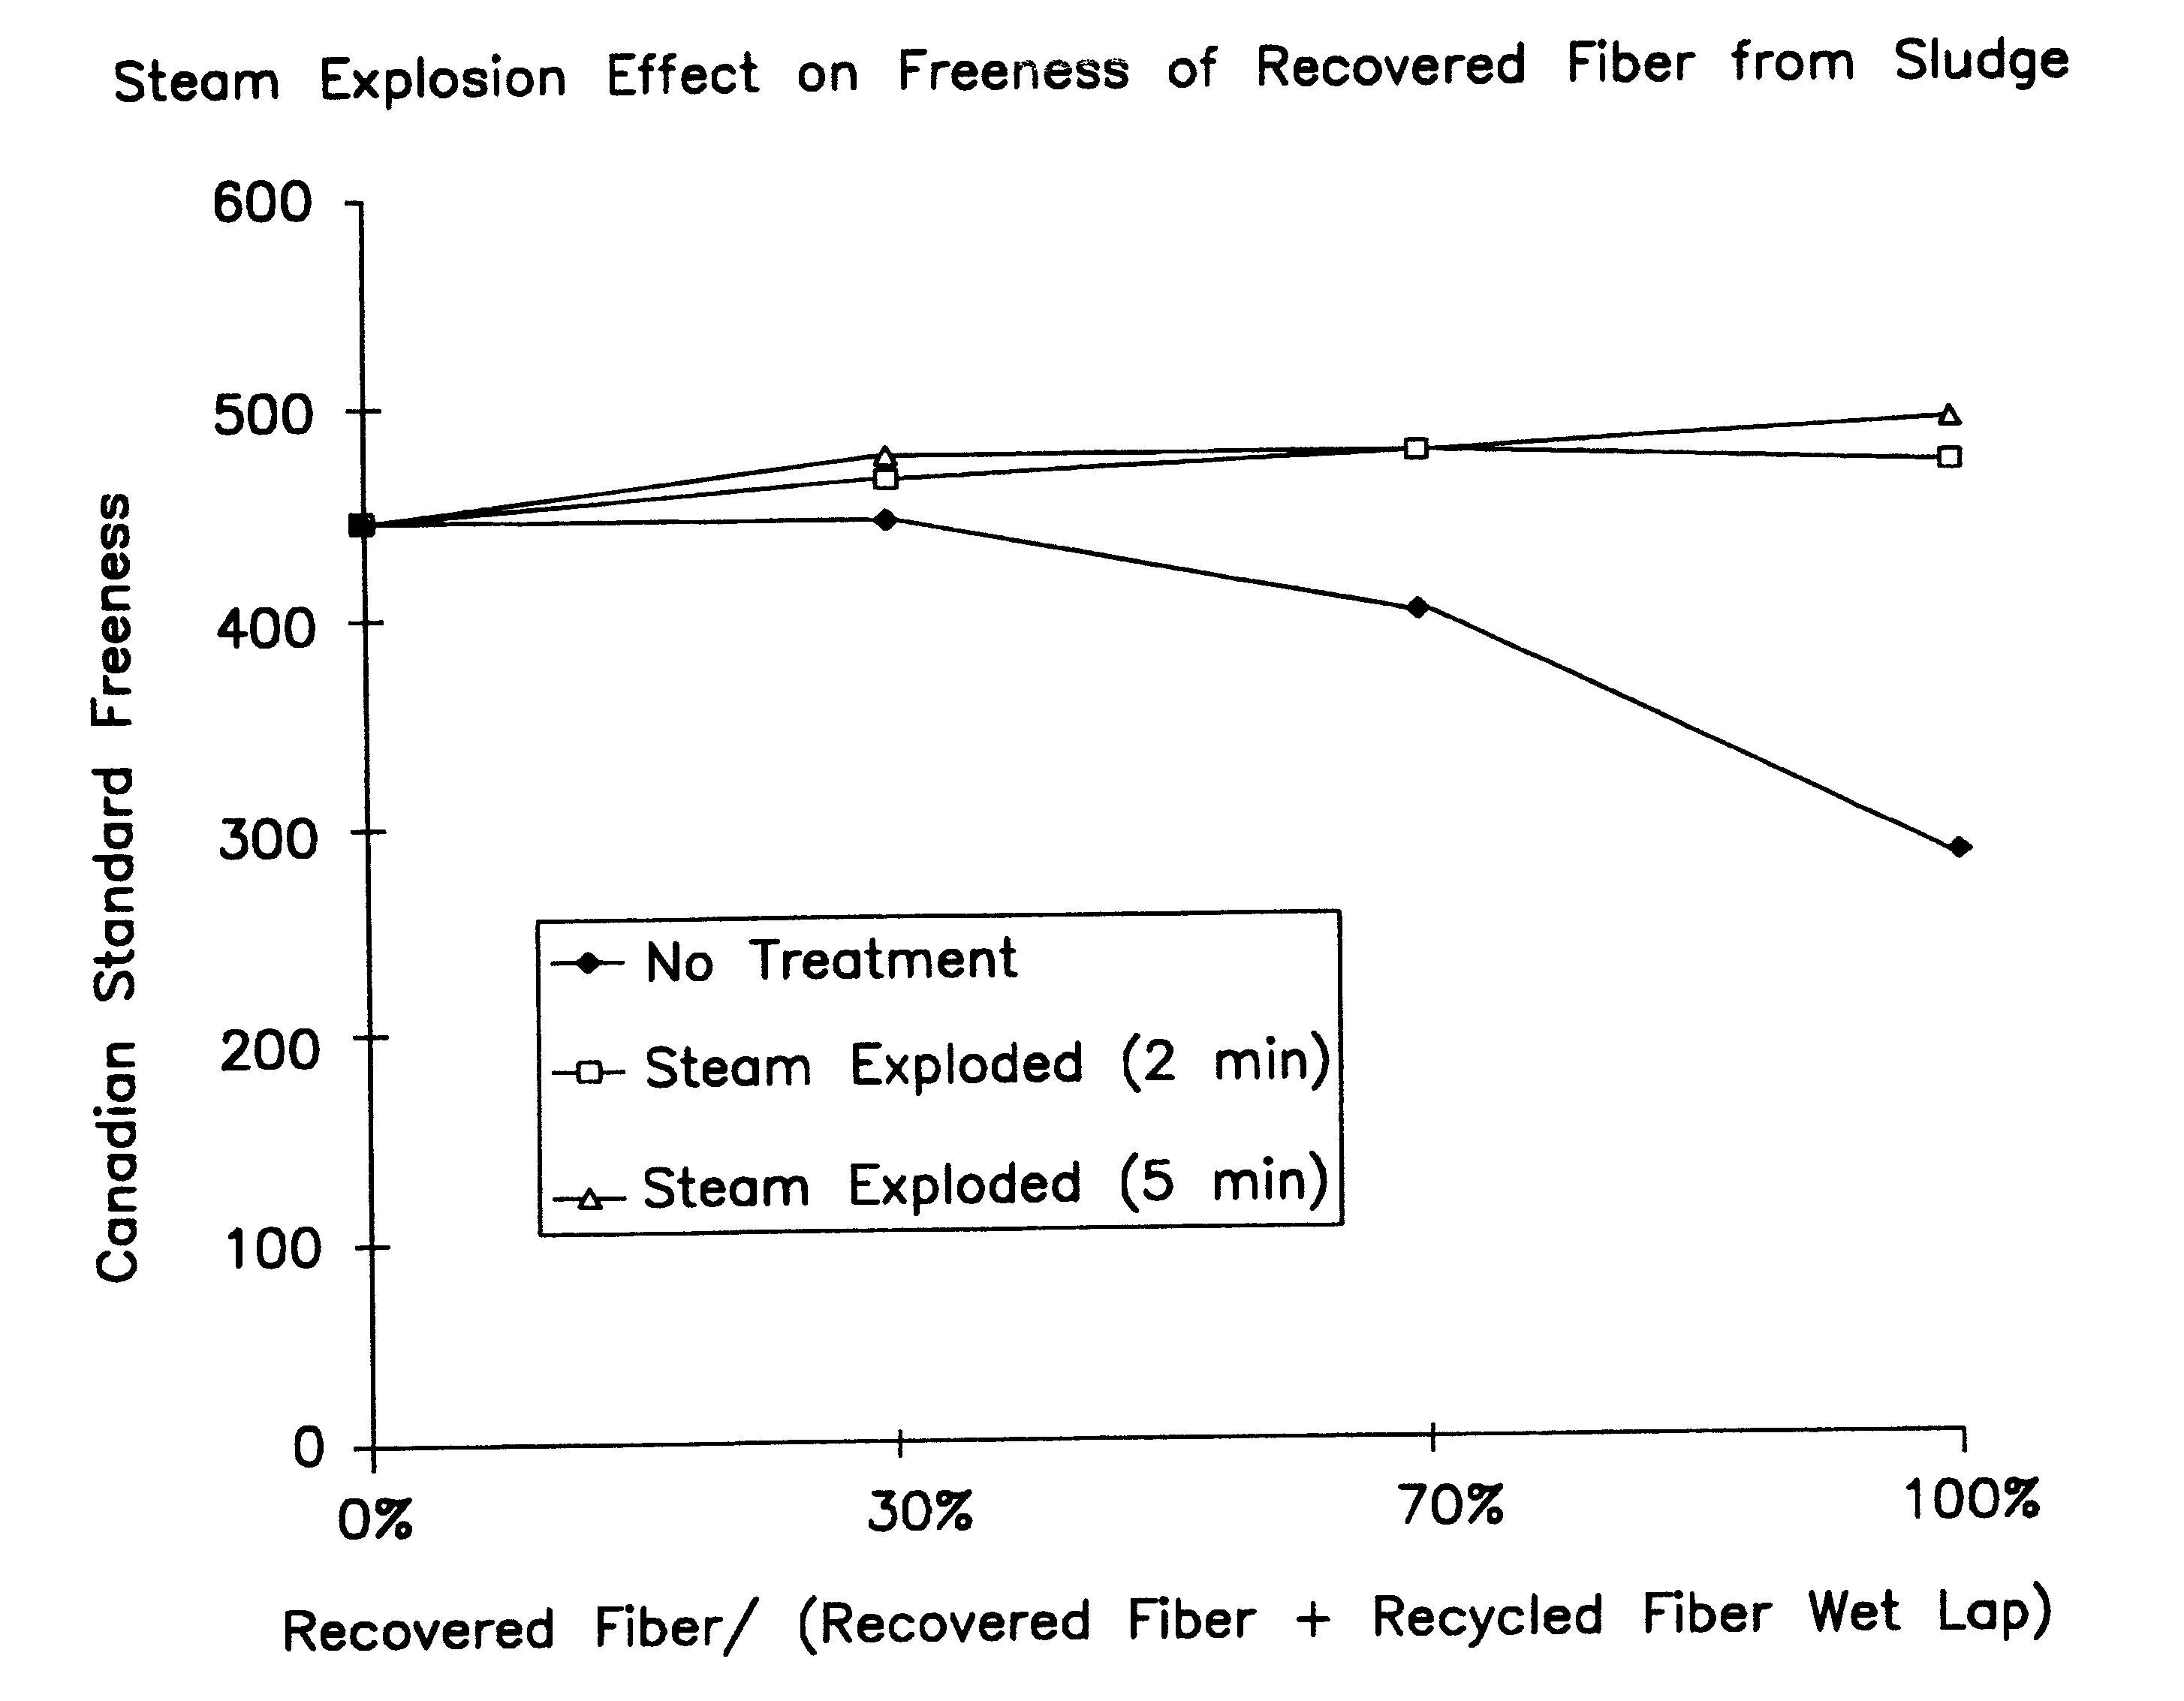 Recovery of fibers from a fiber processing waste sludge